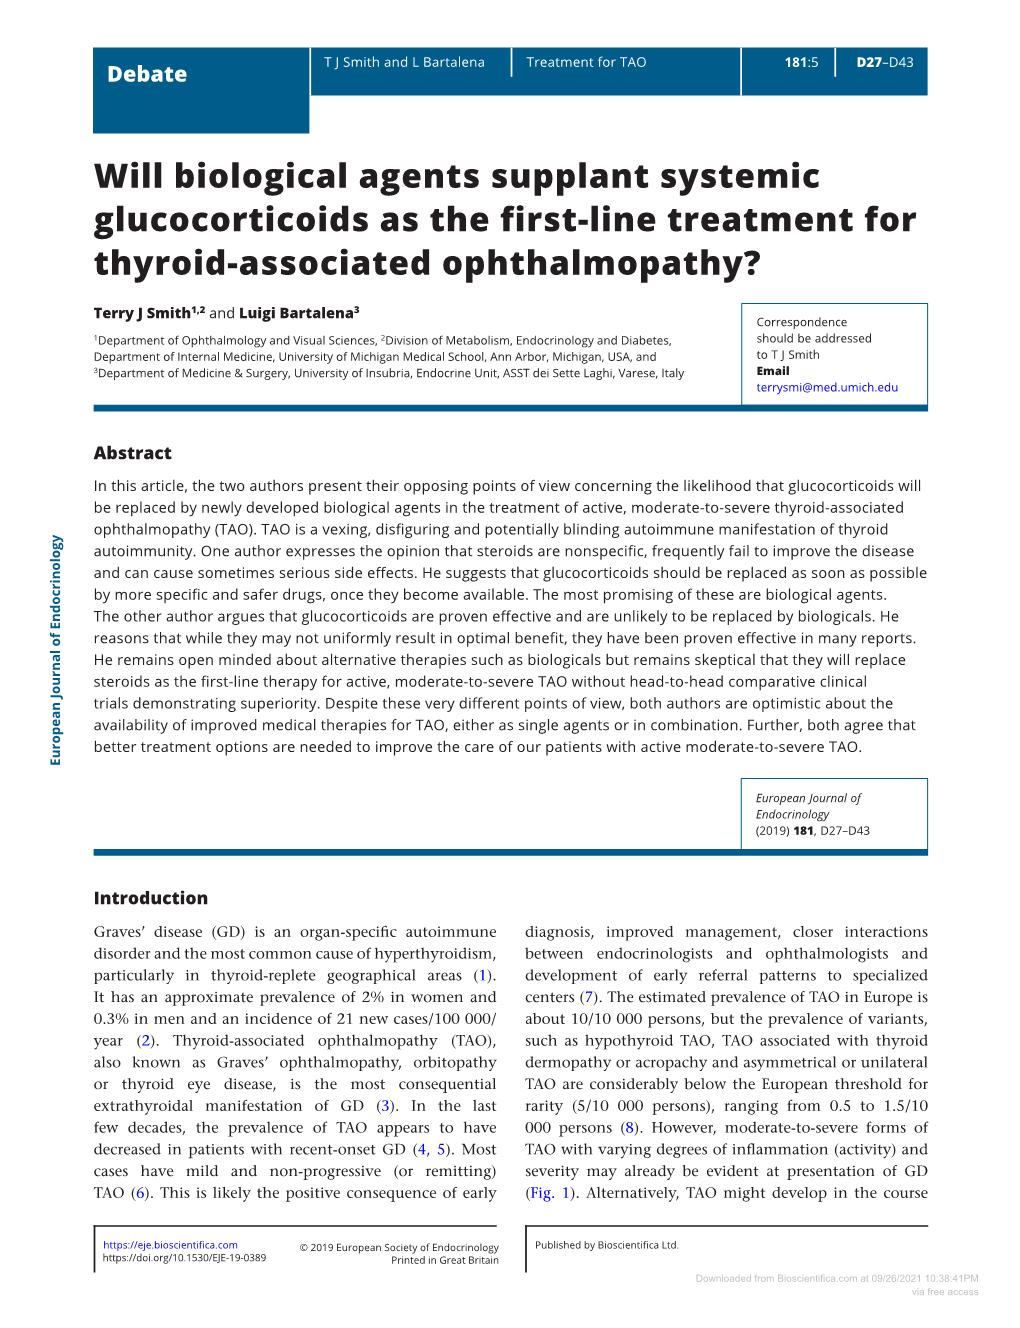 Will Biological Agents Supplant Systemic Glucocorticoids As the First-Line Treatment for Thyroid-Associated Ophthalmopathy?